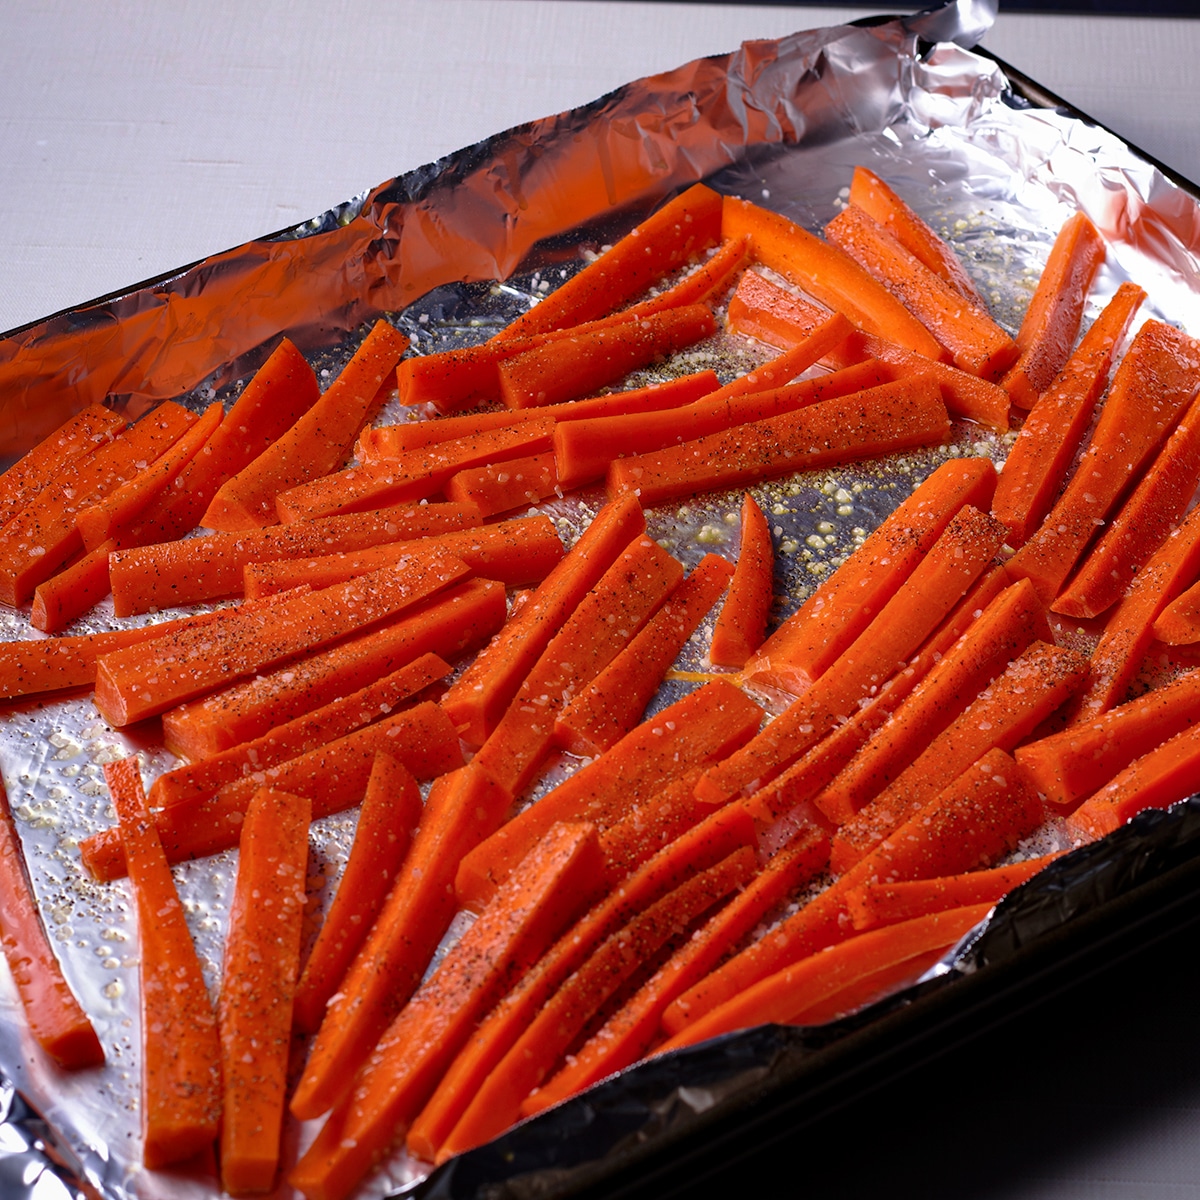 Carrots tossed in olive oil and sprinkled with salt and pepper on a foil lined baking sheet.